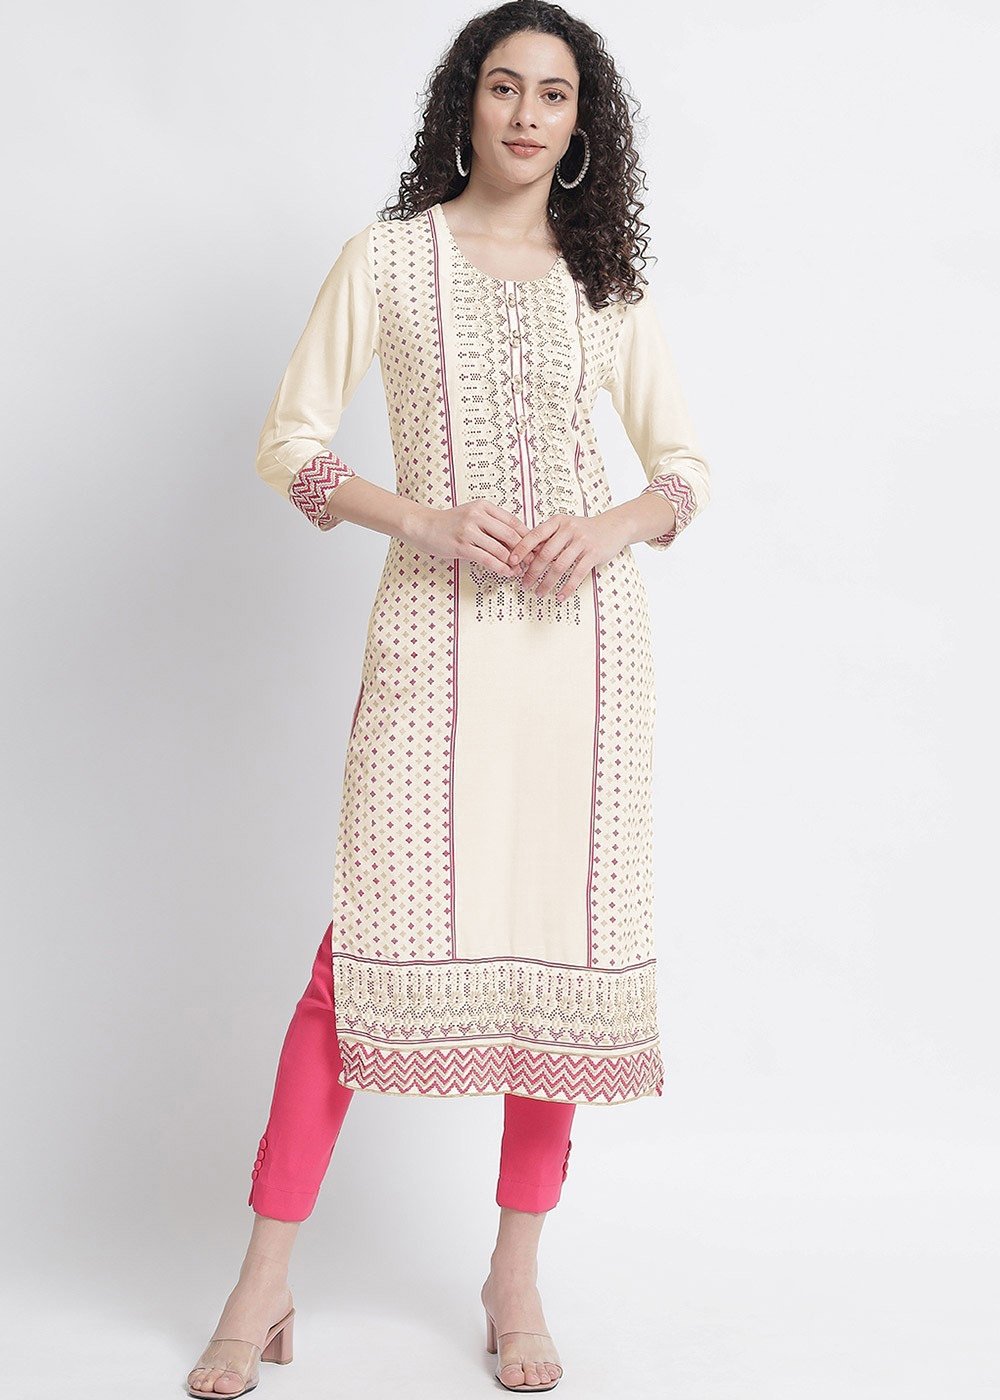 Off White Printed Readymade Kurti For Casual Wear Latest 793KR07